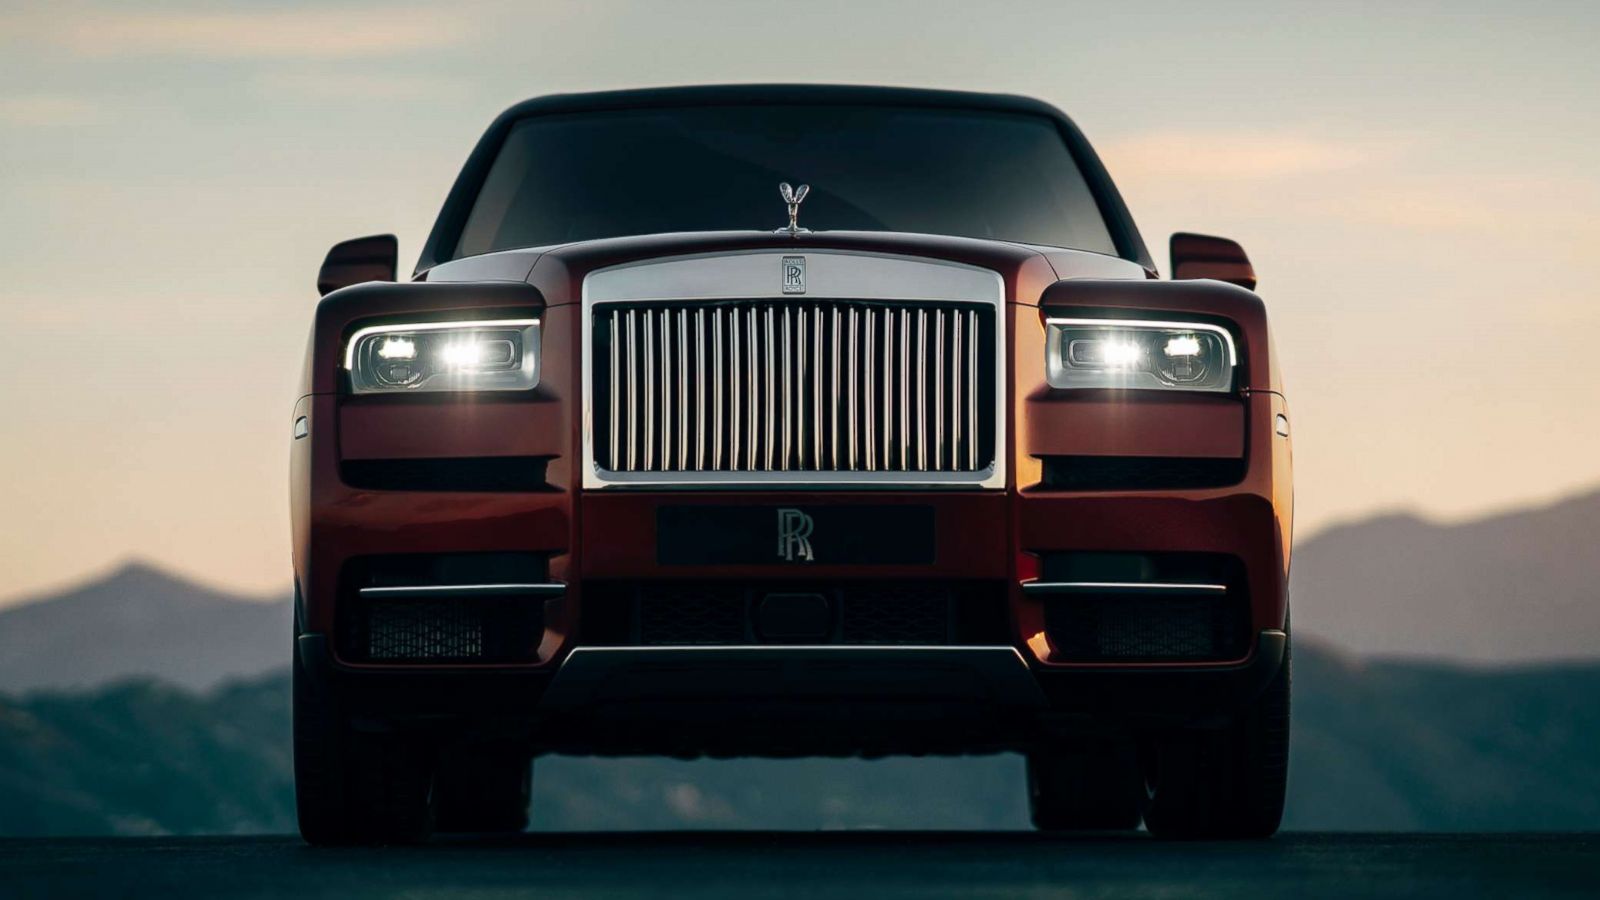 Rolls-Royce reveals Cullinan SUV at a price of $325,000